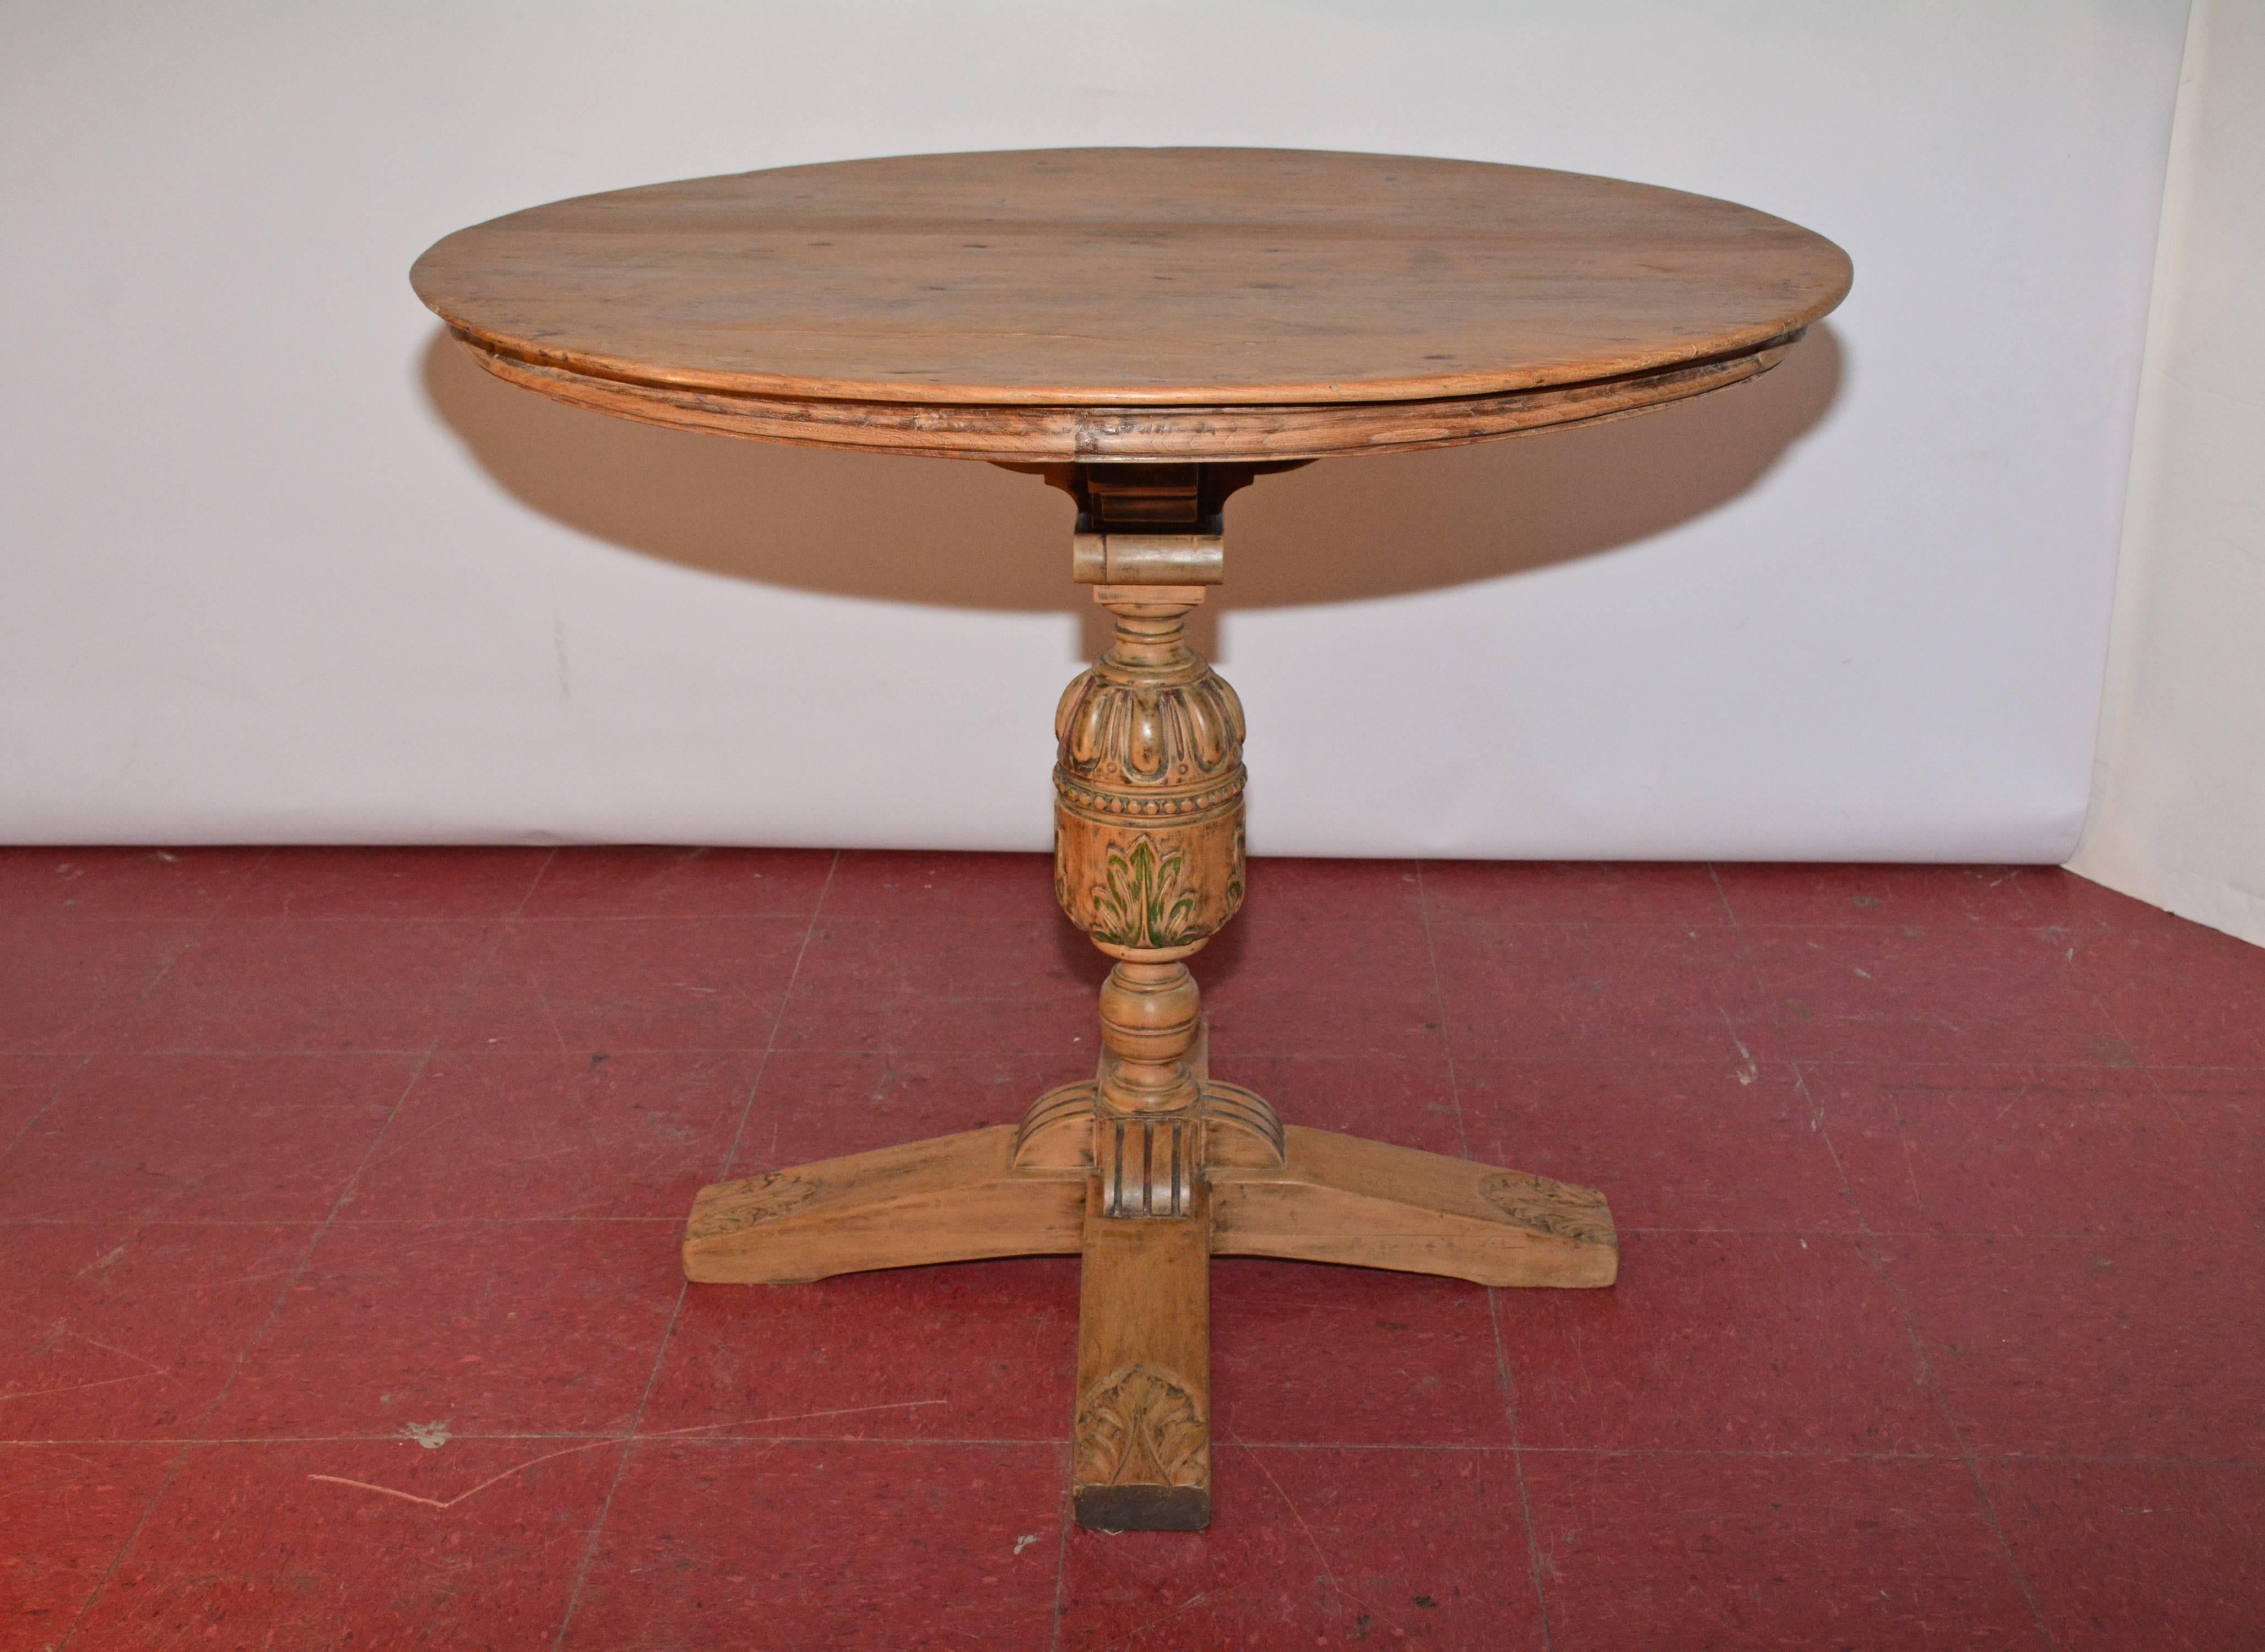 The round table is composed of rusticated fruitwood top with crisscross framing underneath attached to Jacobean-Revival pedestal base. The oak base is decorated with carved acanthus leaves, beading and an Ionic capital. Waxed finish.